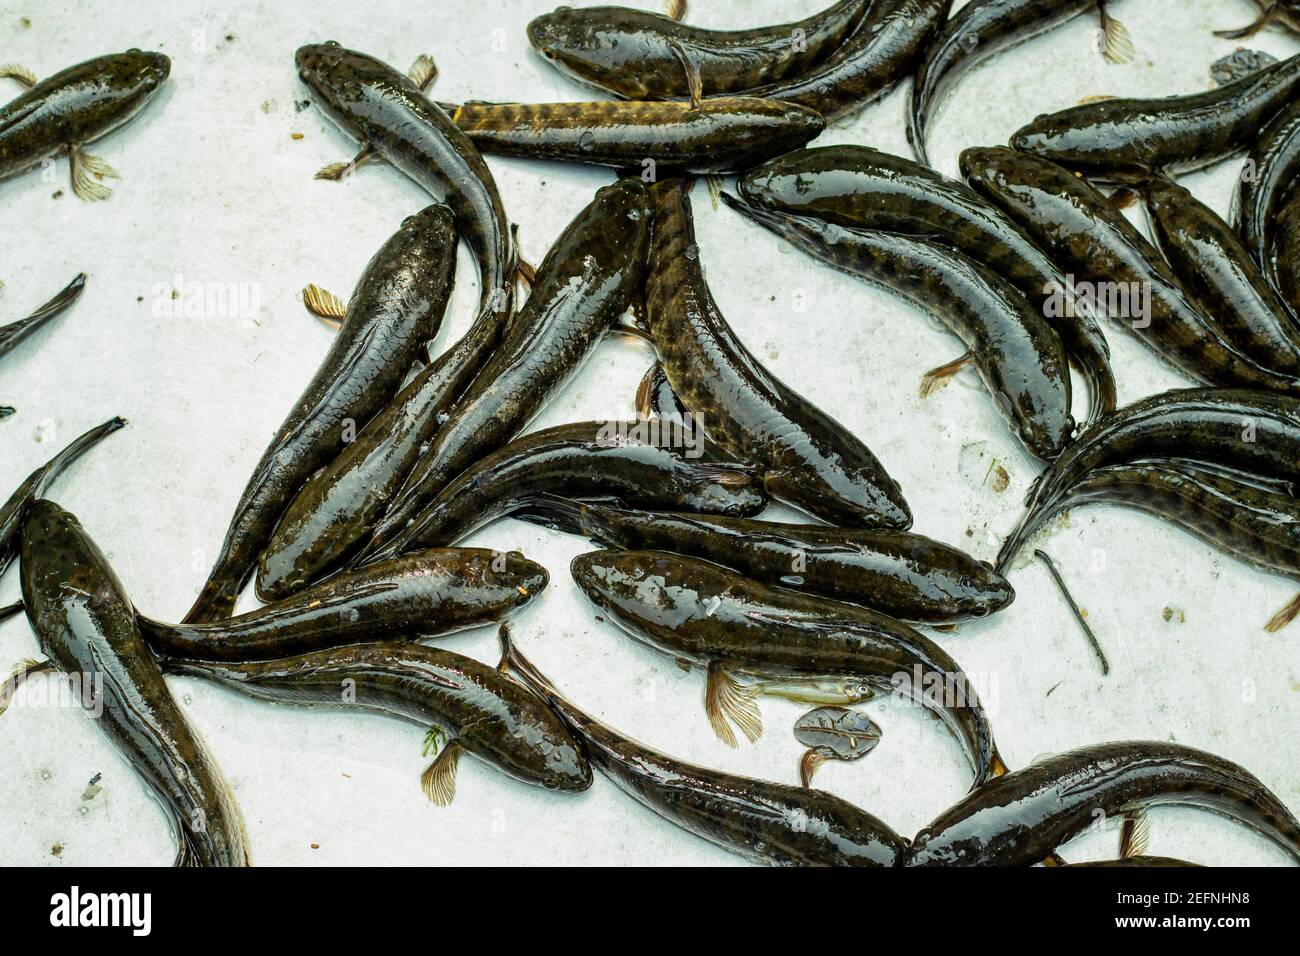 Telo Taki or Spotted snakehead, Channa punctata or Spotted snakehead that found in thousands of rivers and ponds Stock Photo